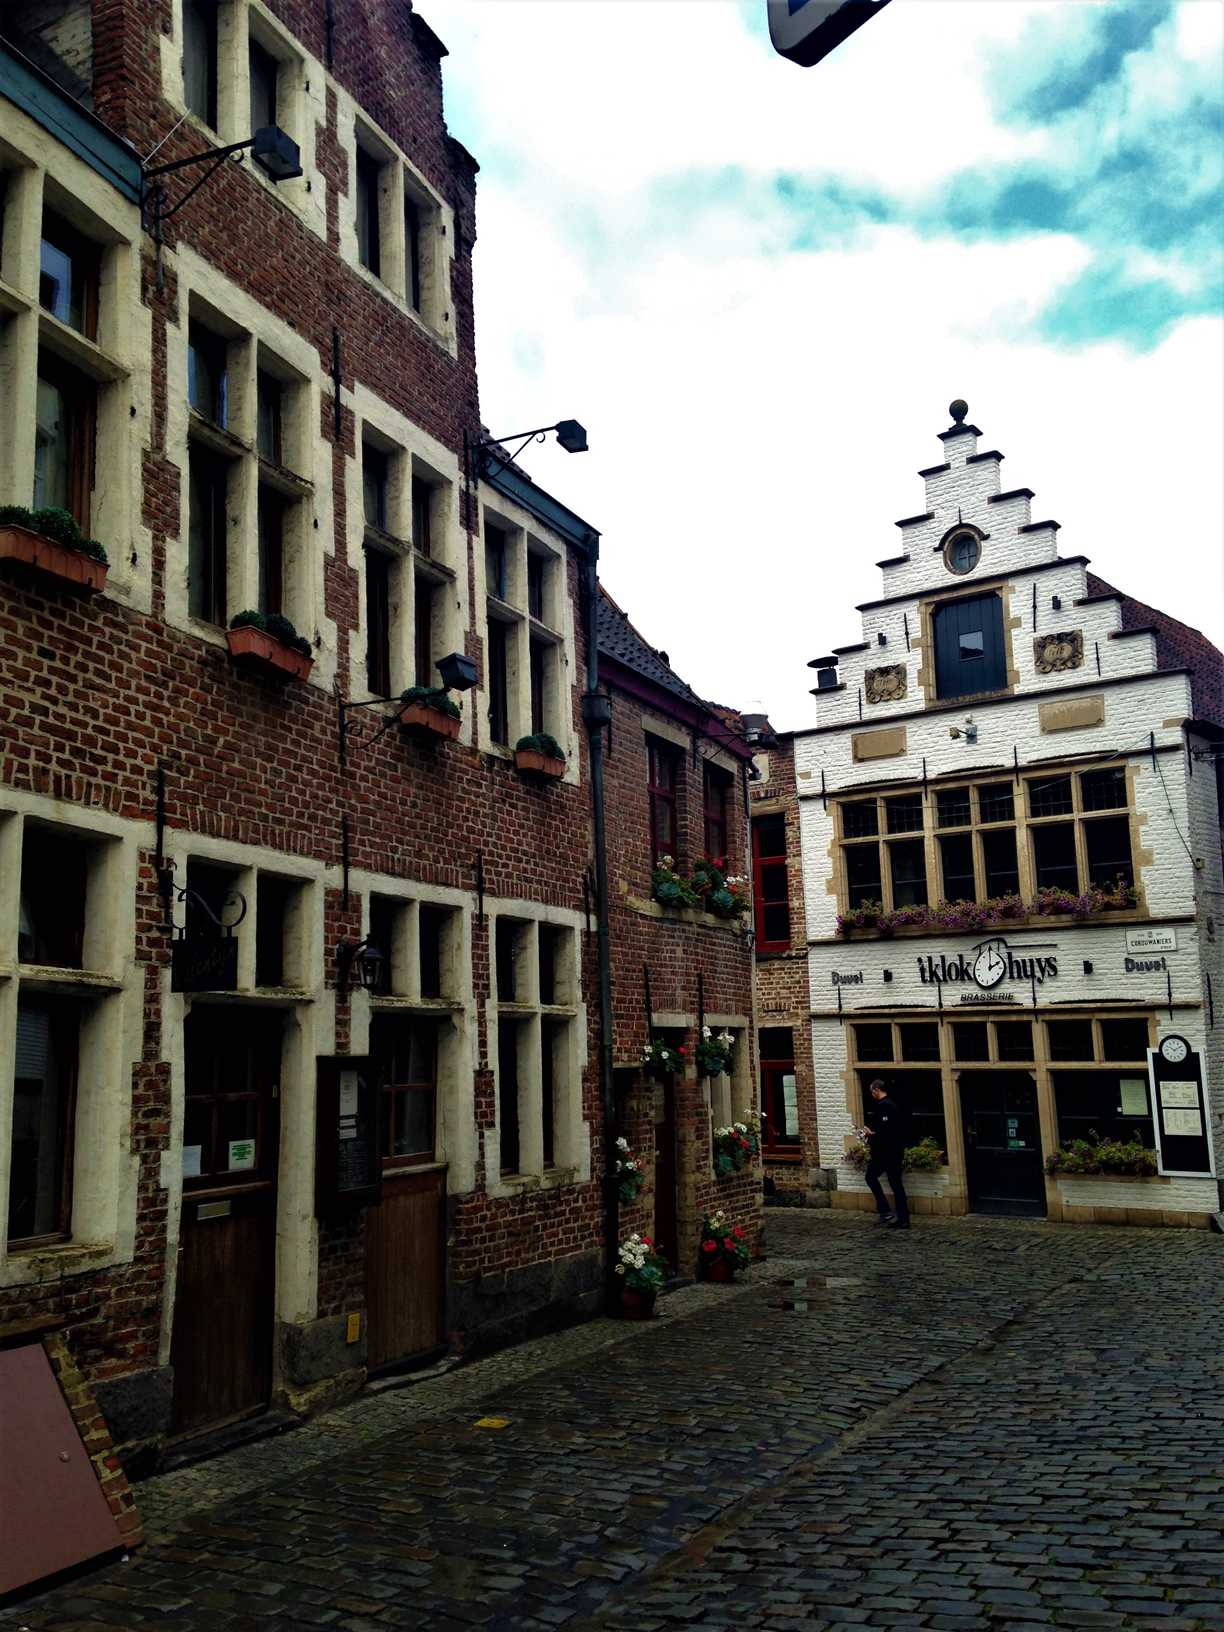 This picture shows a street in Ghent, Belgium with a brick building to the left and a white brick building with gables in the background.